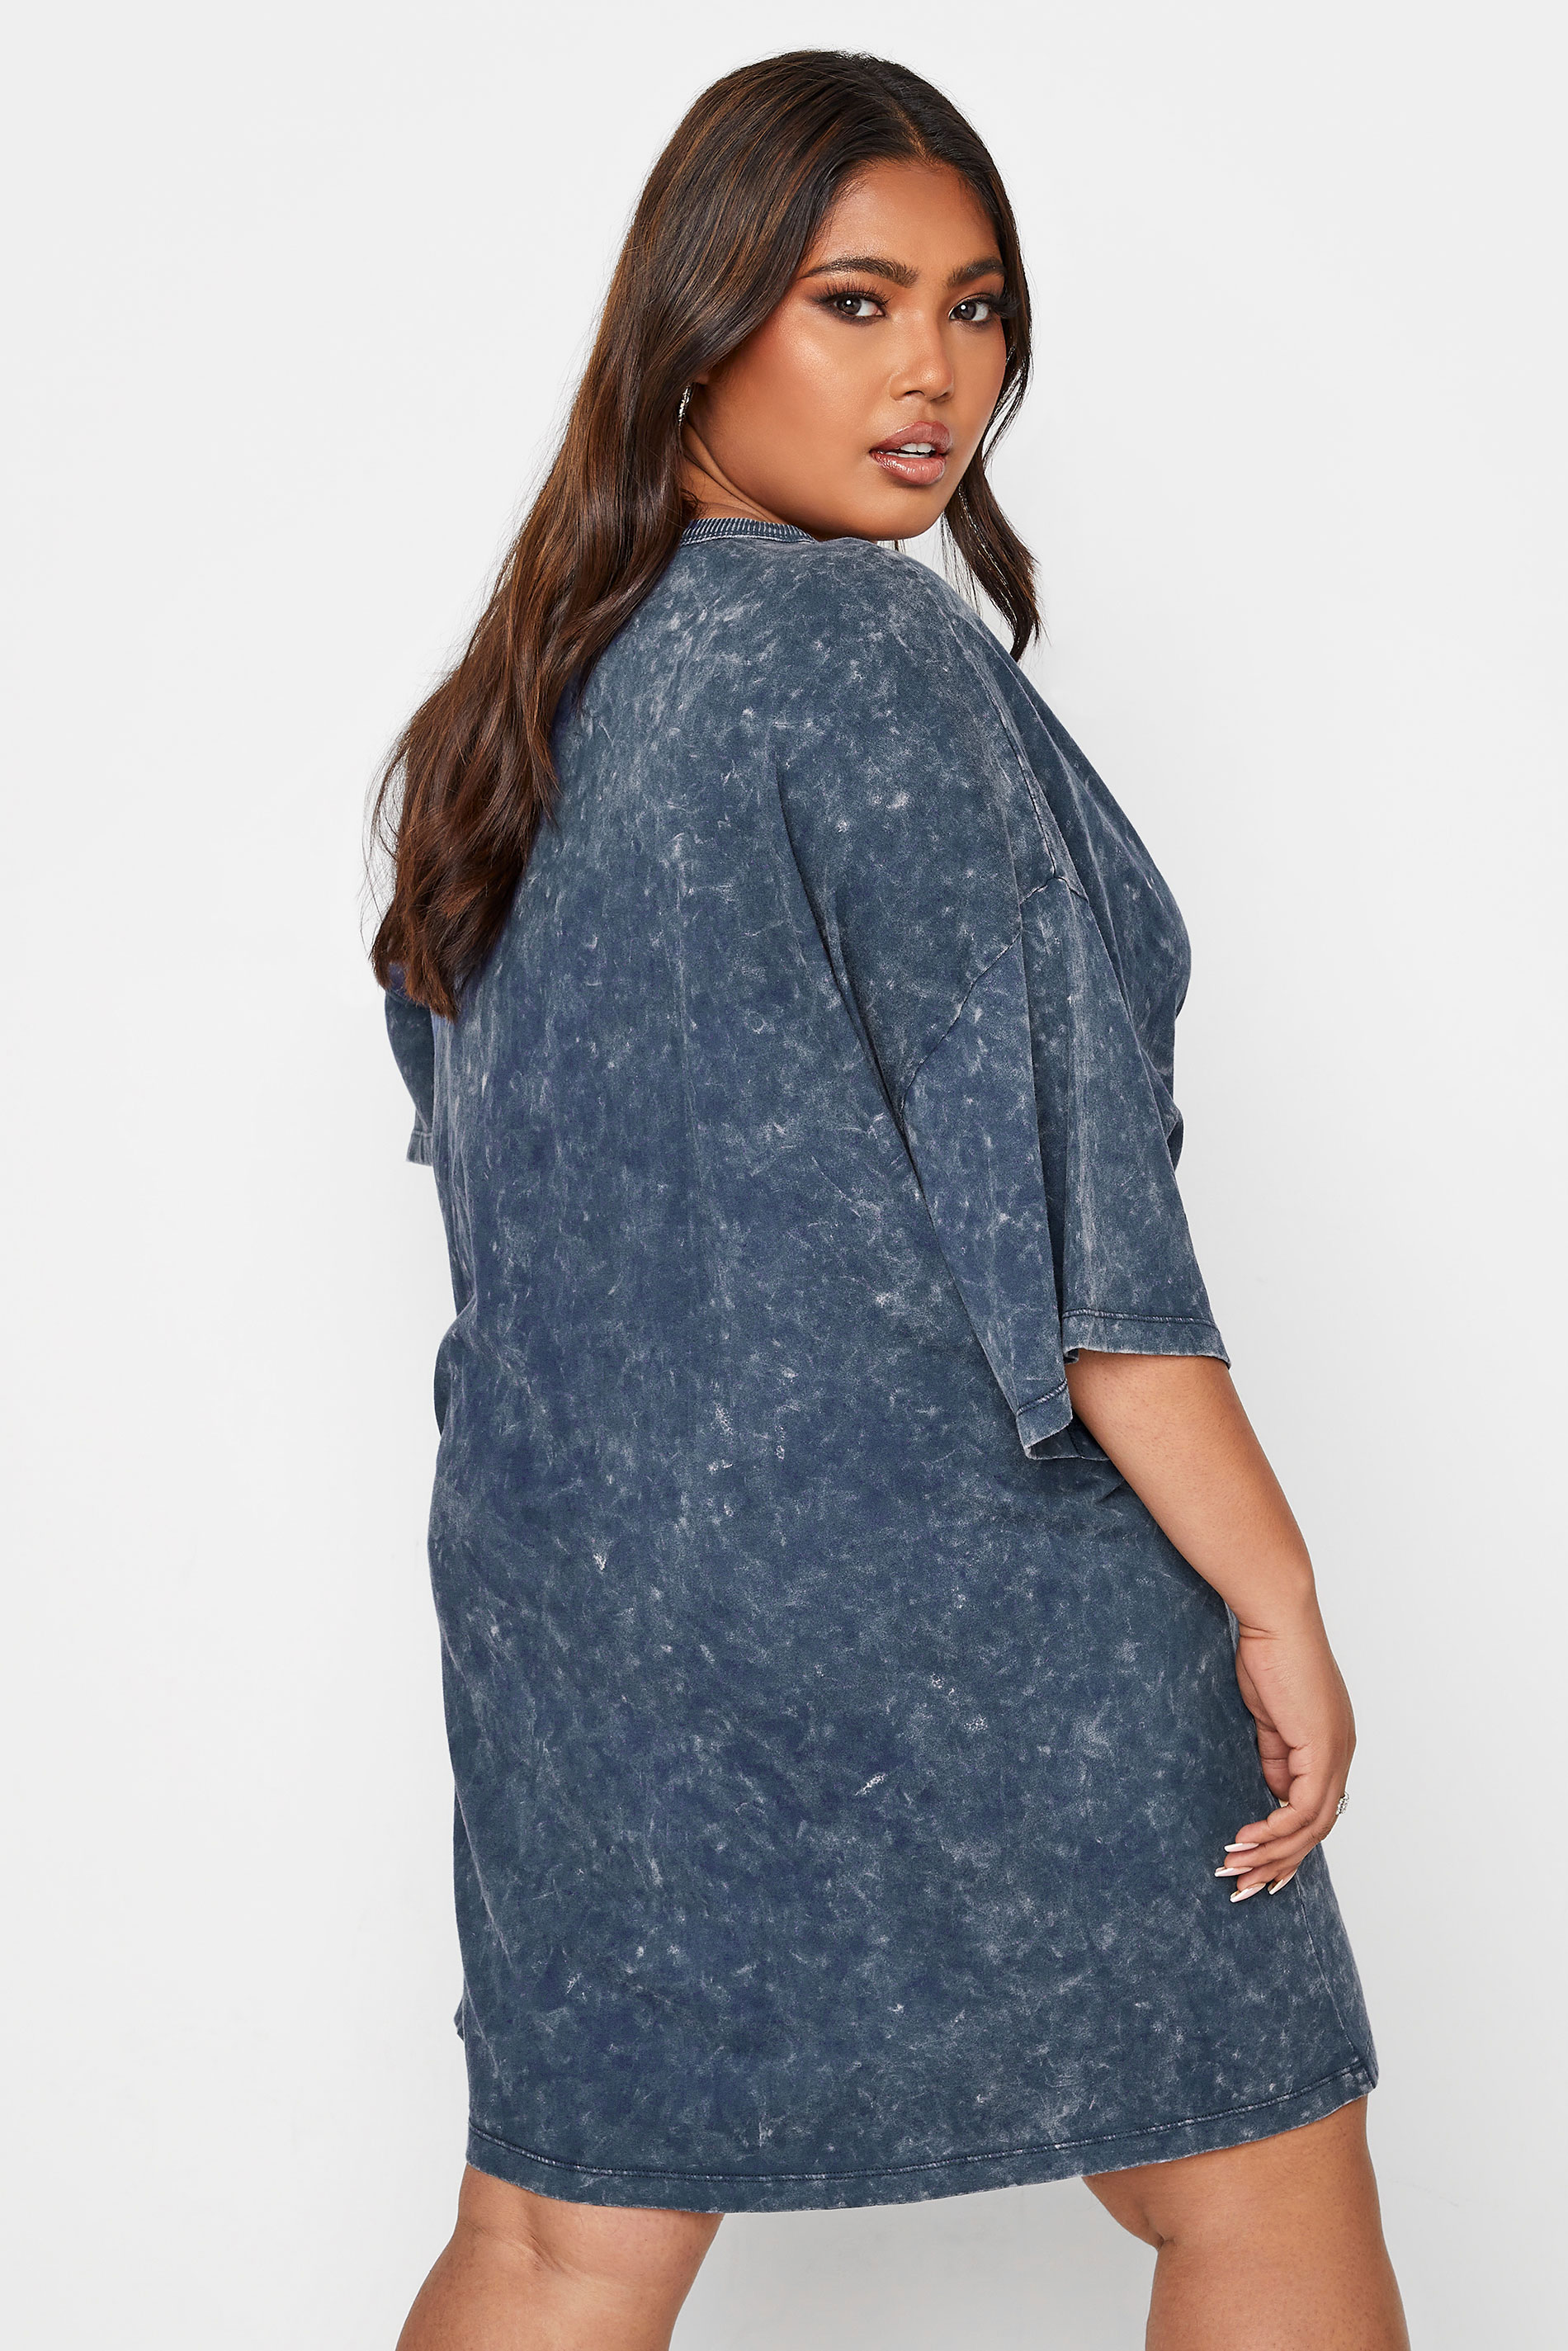 Grande taille  Tops Grande taille  Tuniques | Robe-T-Shirt Bleue Marine Délavé Oversize 'New York' - VQ05772